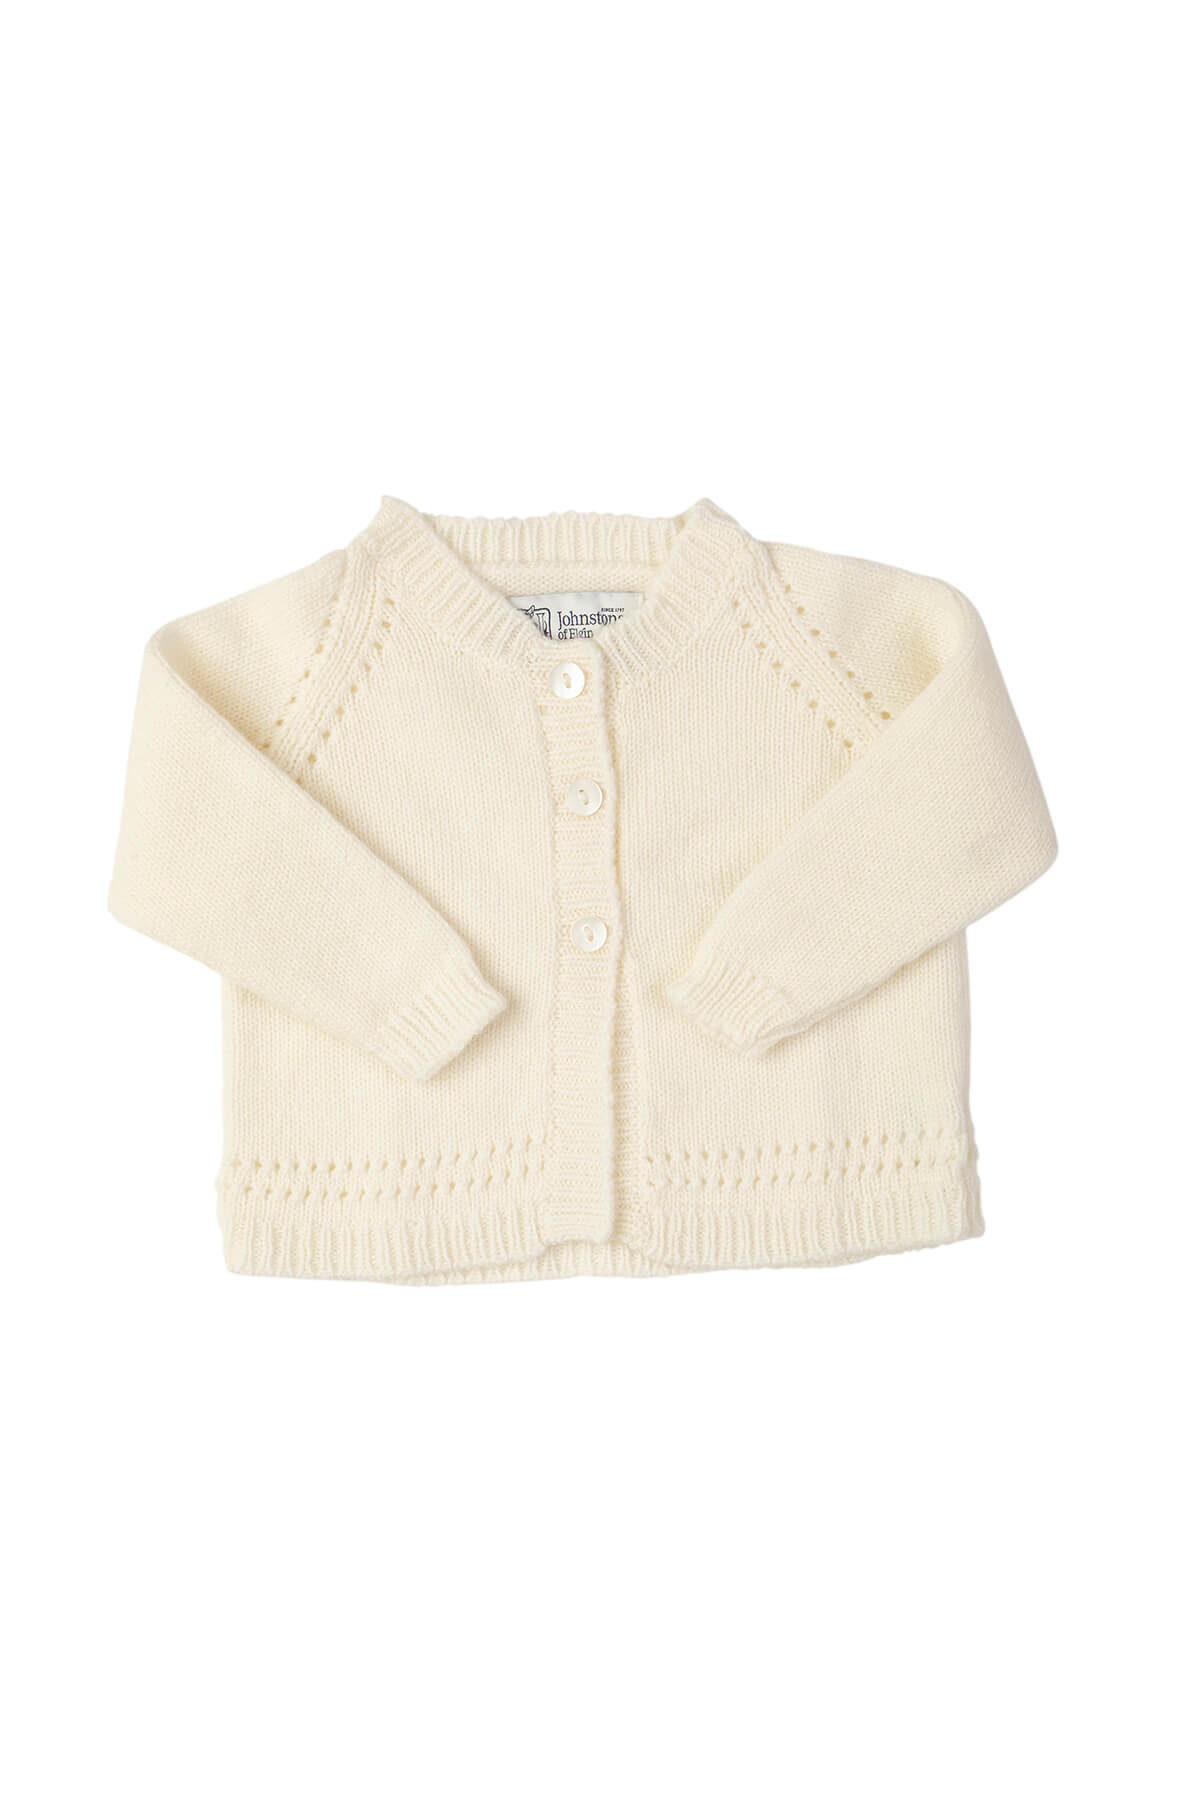 Johnstons of Elgin Hand Knitted Cashmere Baby Cardigan in Ecru on a white background 30193SA0132